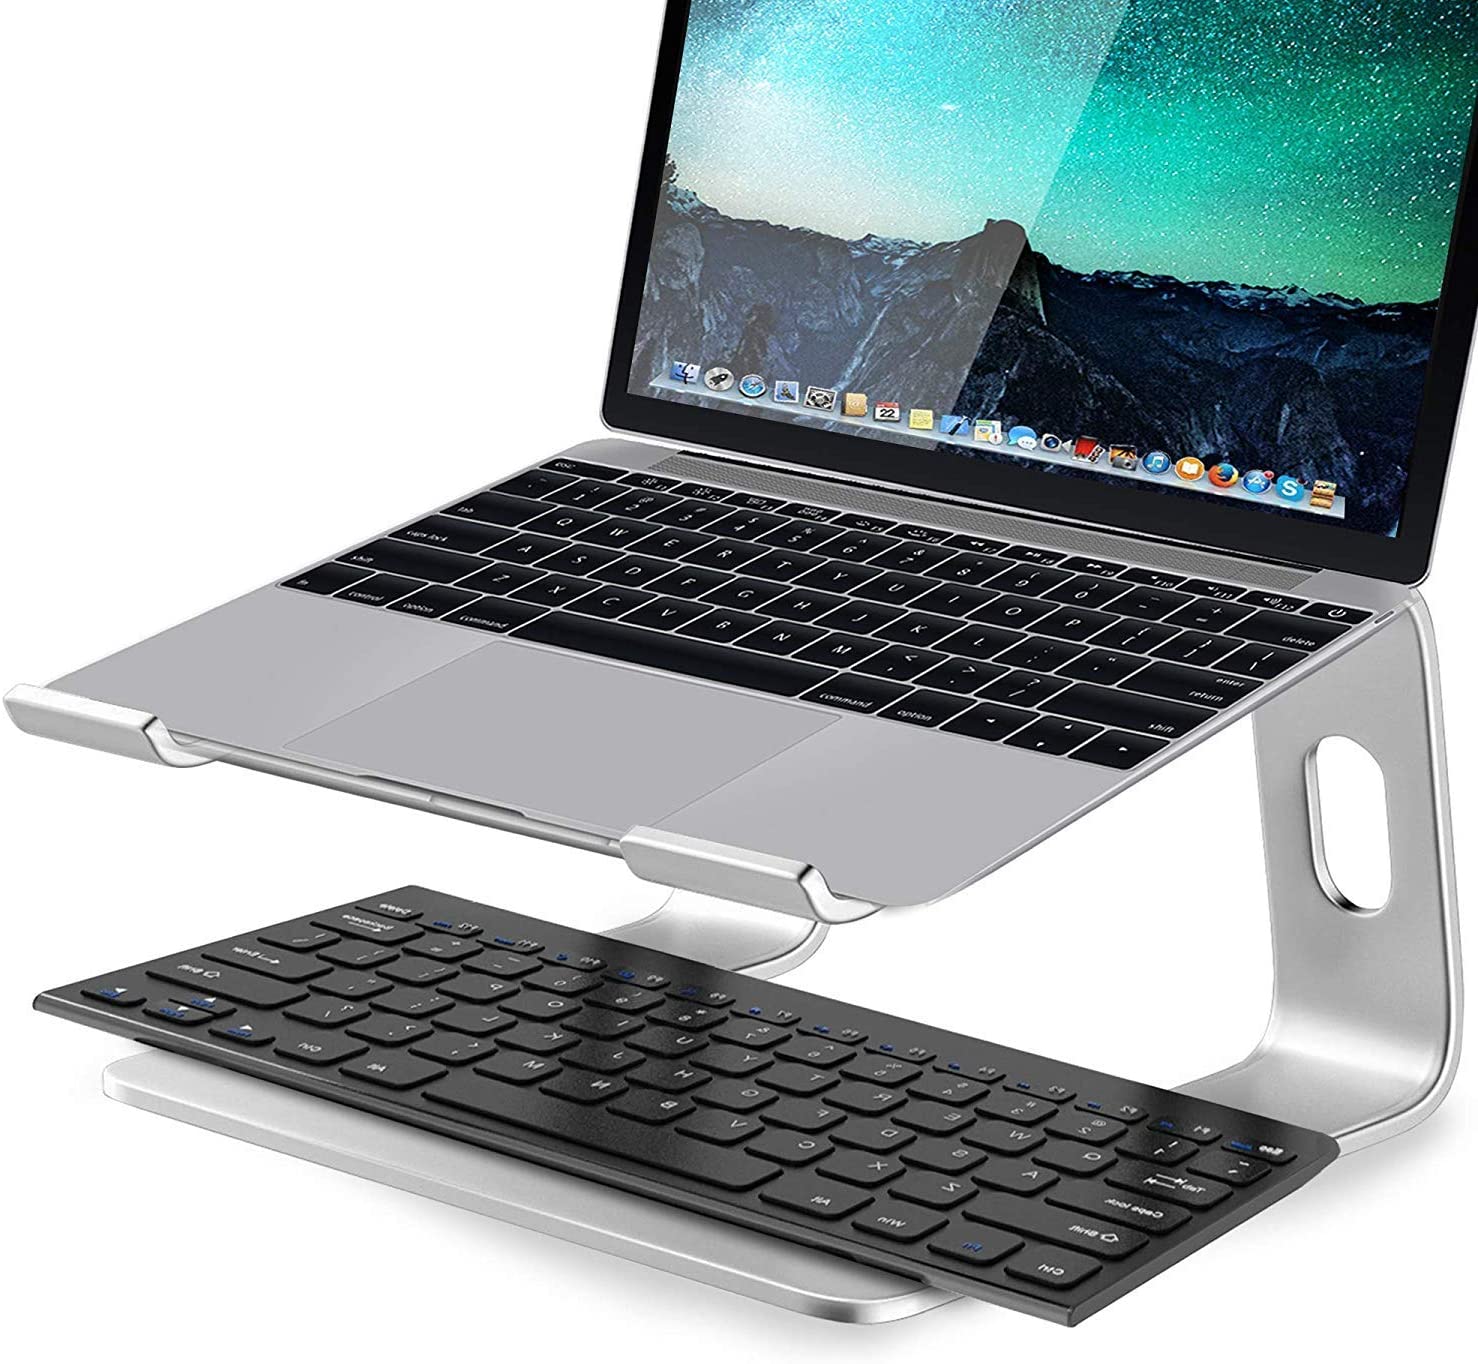 HF-LSH: Aluminum Laptop Stand for Desk Compatible with Mac MacBook Pro Air Apple Notebook, Portable Holder